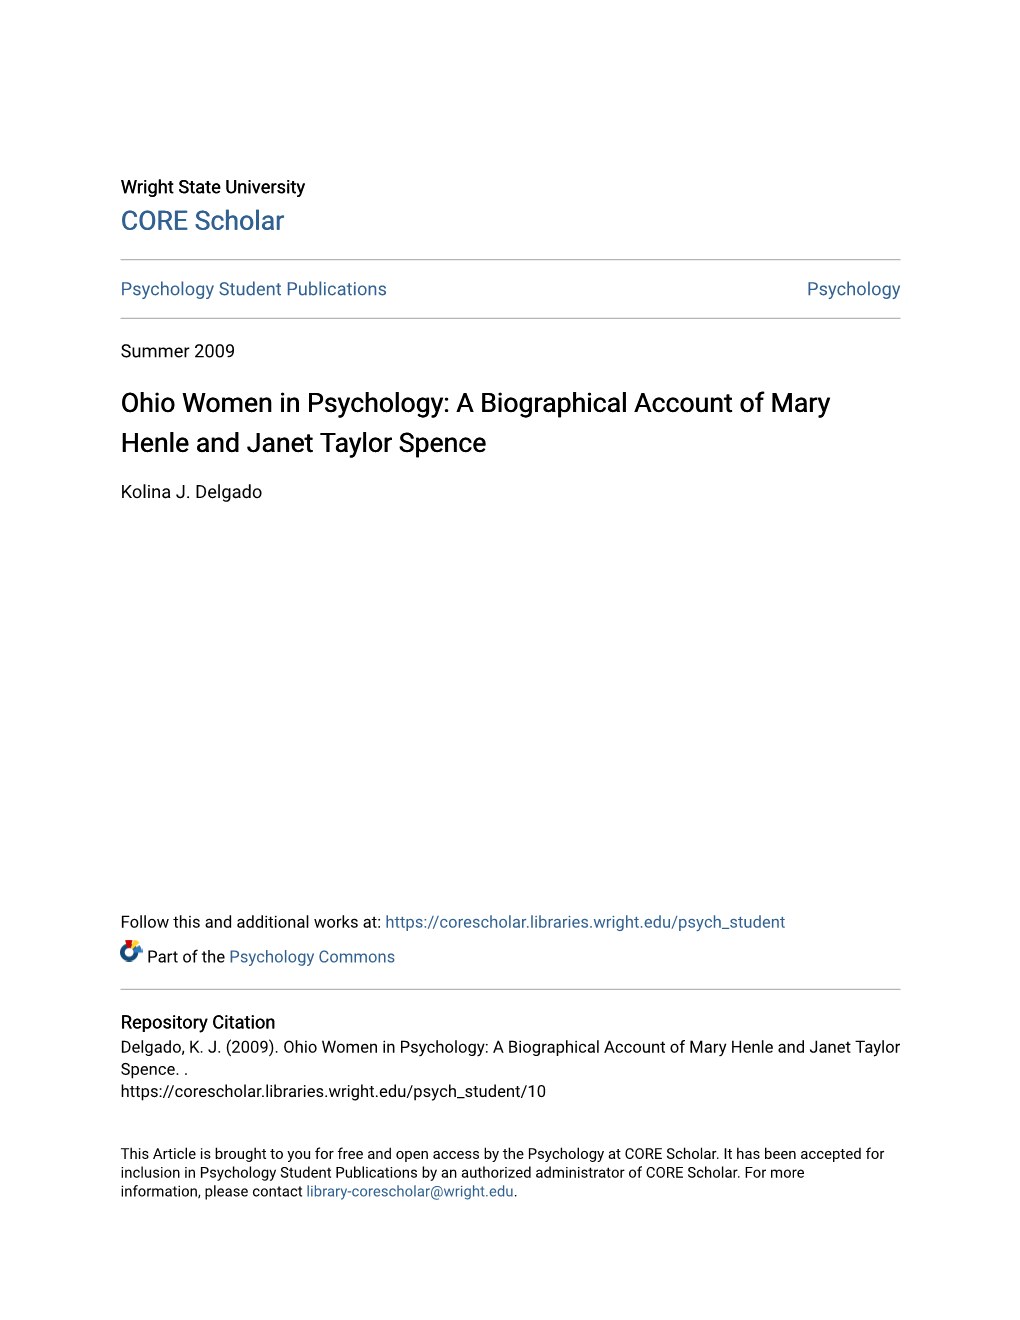 Ohio Women in Psychology: a Biographical Account of Mary Henle and Janet Taylor Spence